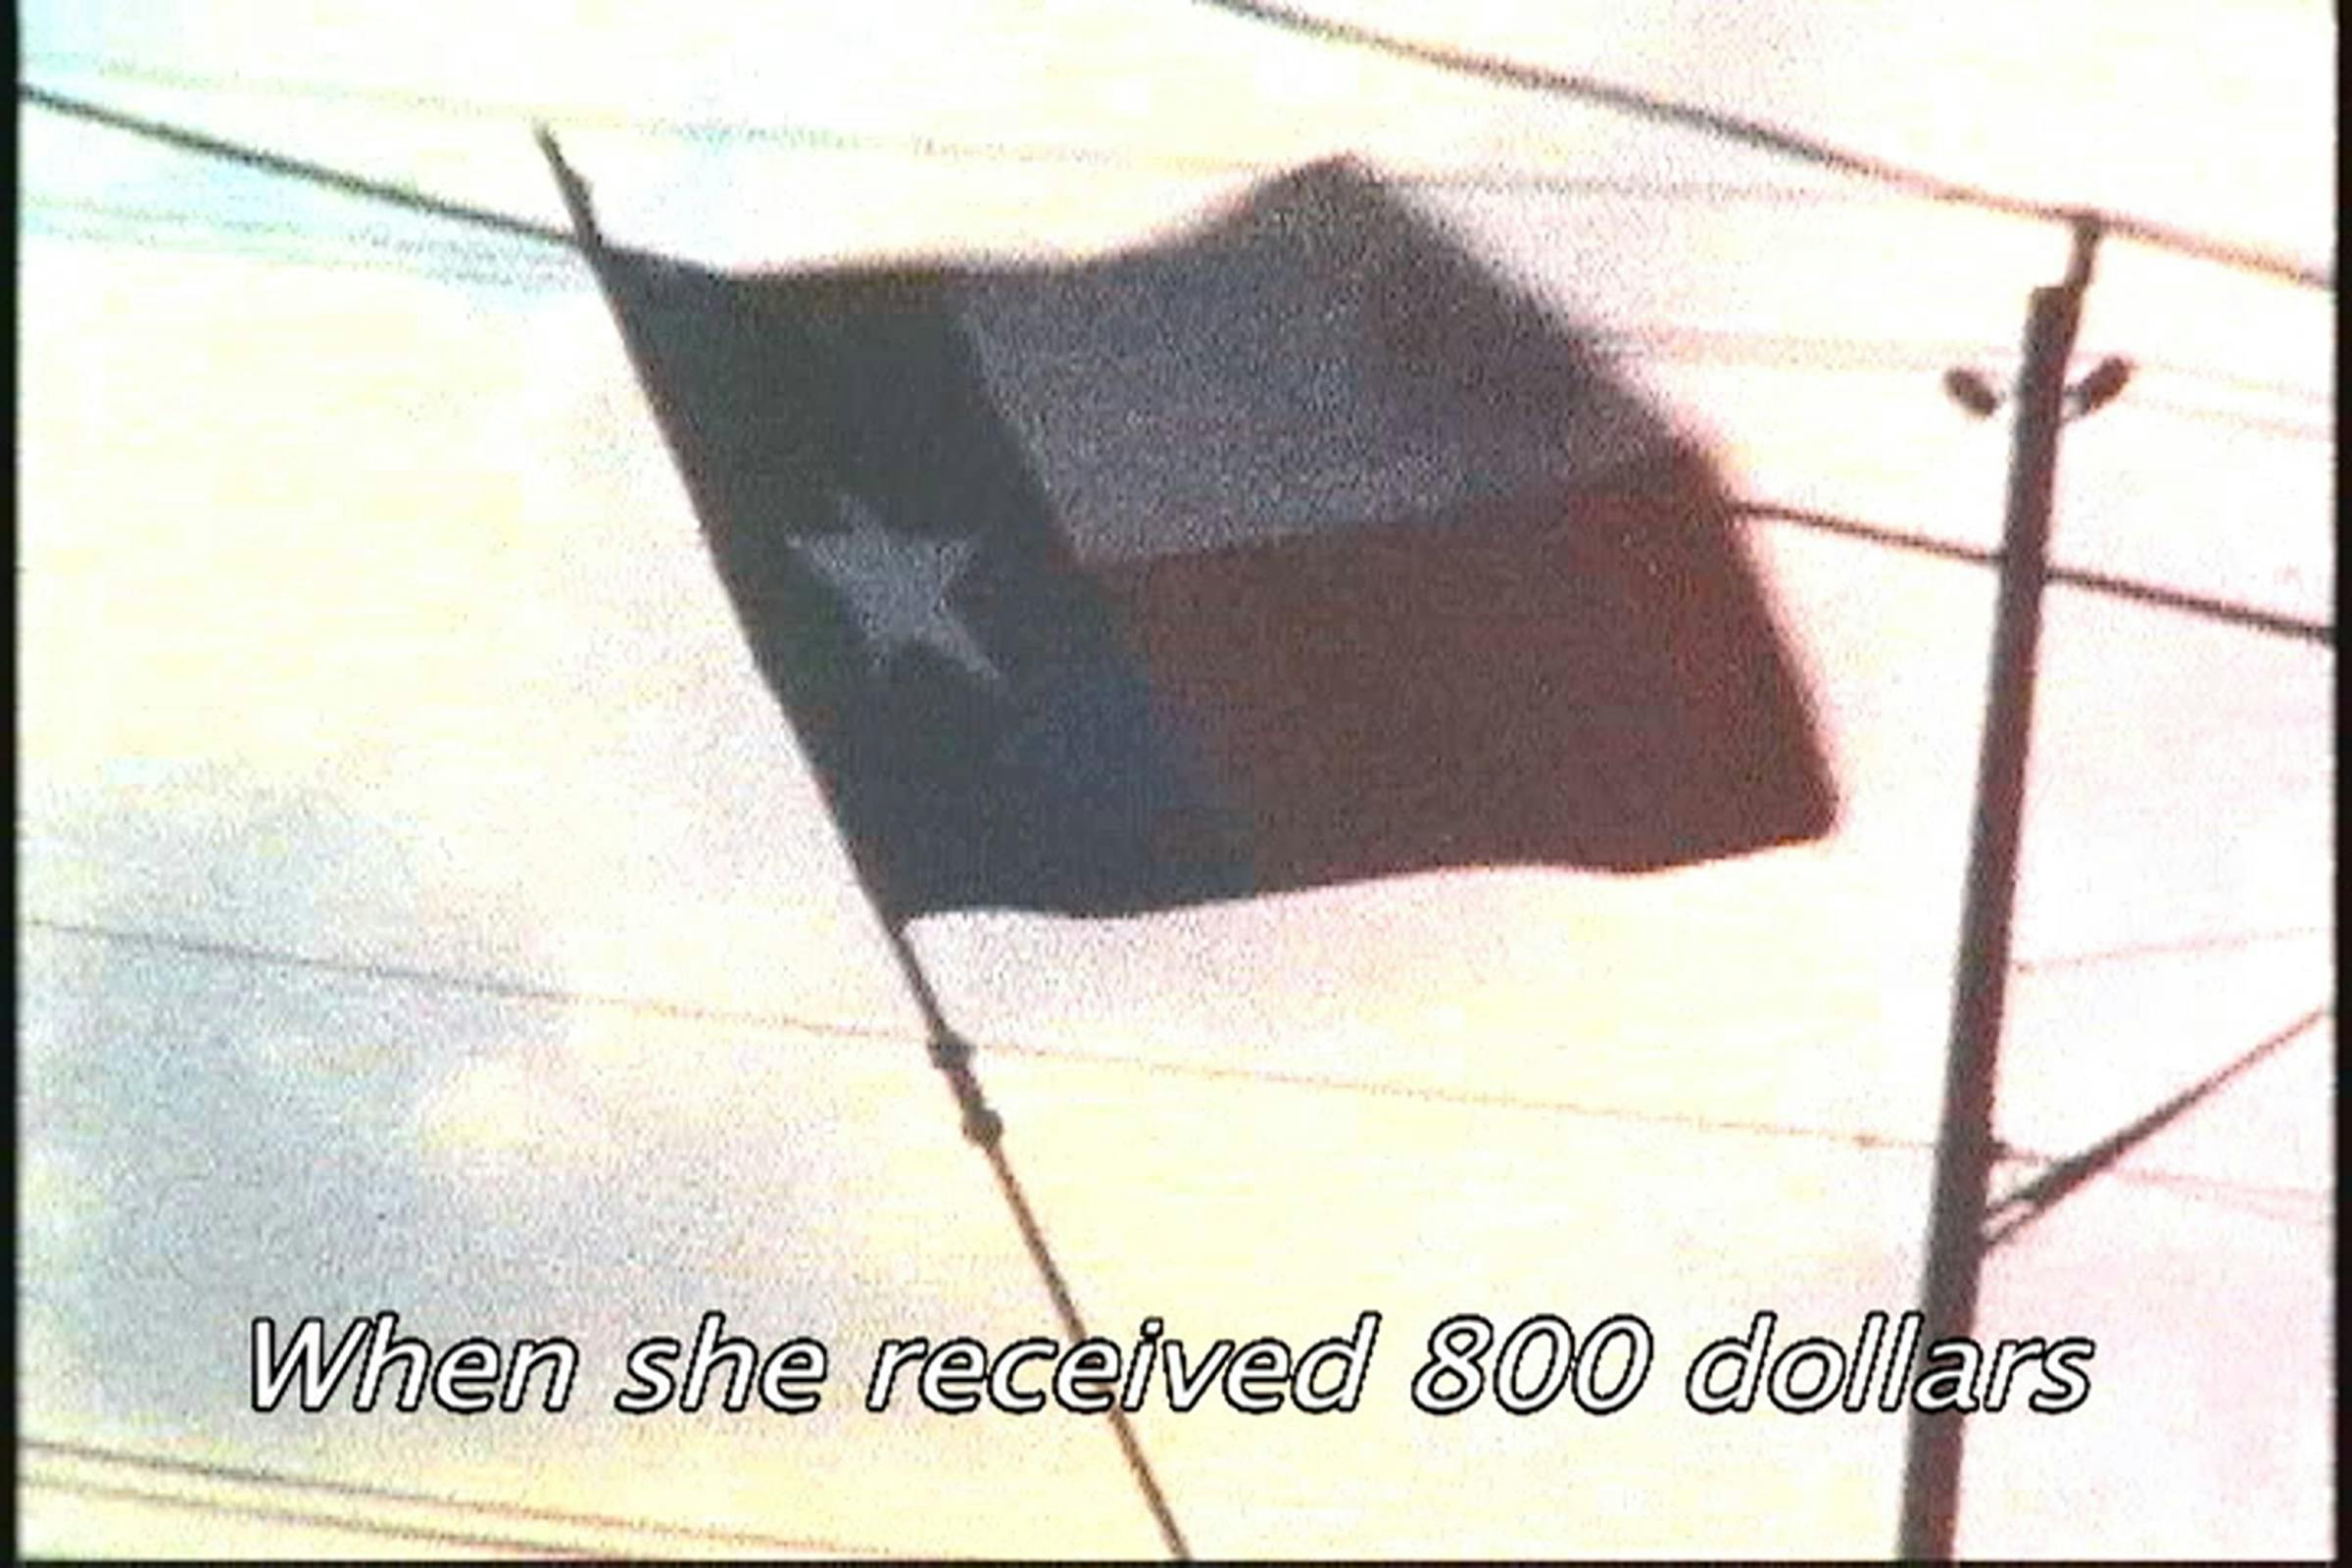 Image of Texas flag cast against a sunny and cloudy sky with telephone wires. The words 'When she received 800 dollars' are superimposed on top